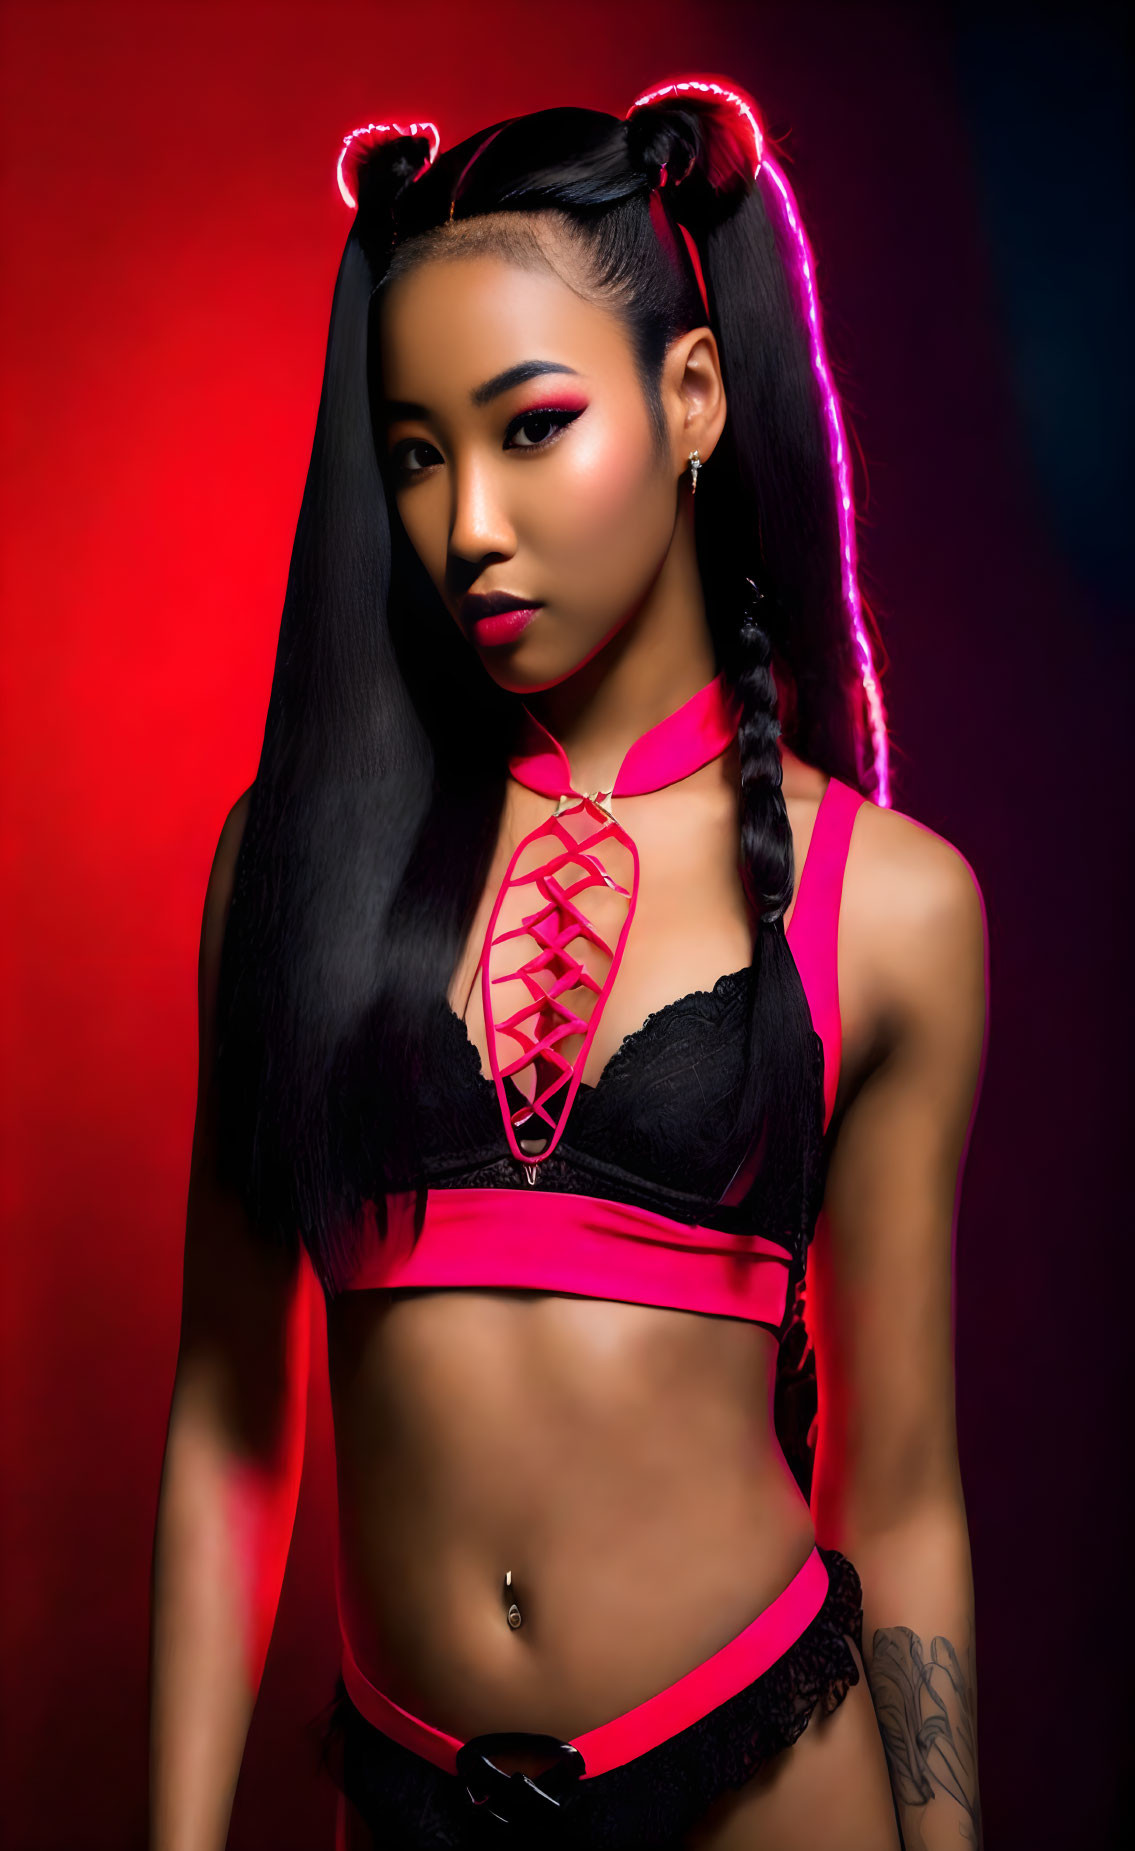 Glowing pink pigtails woman in black and pink outfit with tattoo on left arm on red